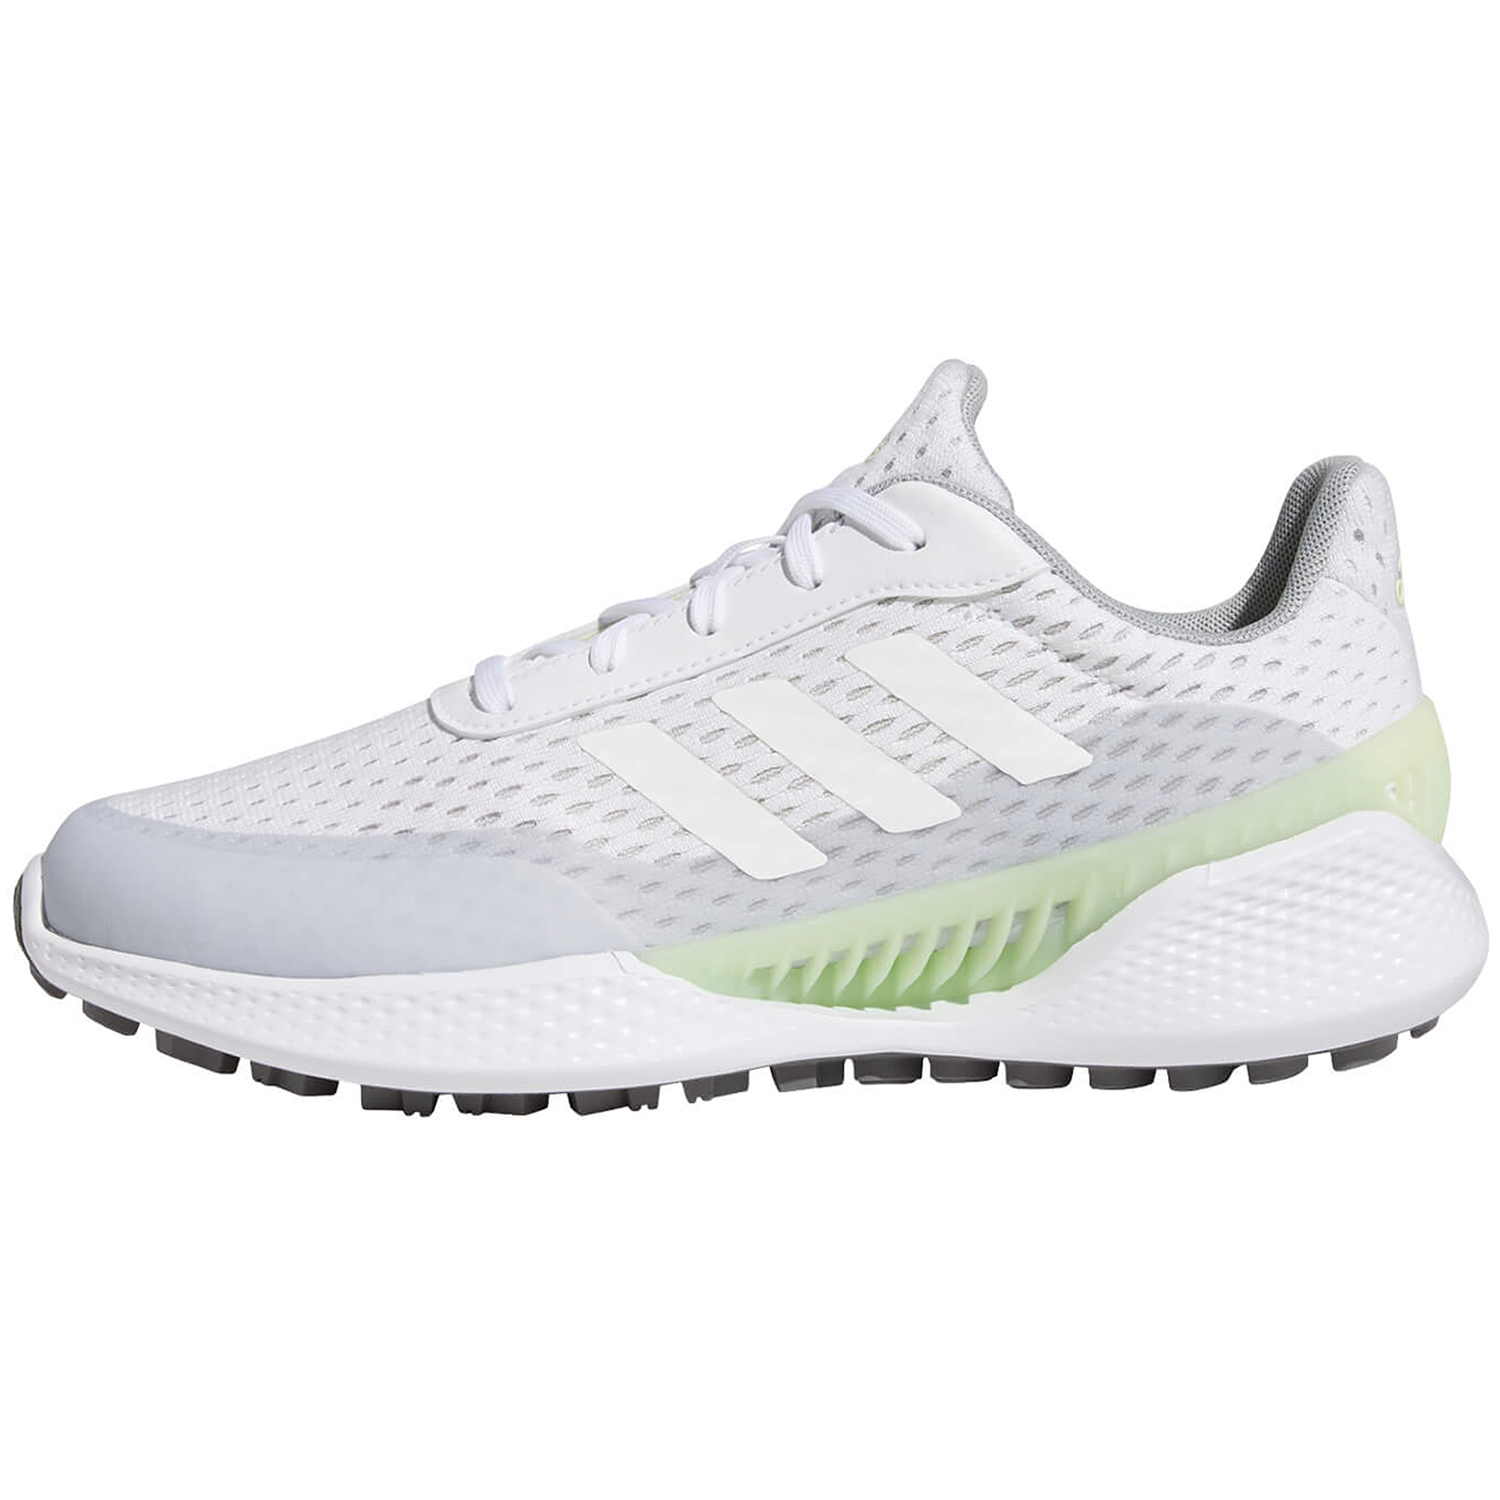 adidas Summervent Ladies Golf Shoes White/Almost Slime | Scottsdale Golf